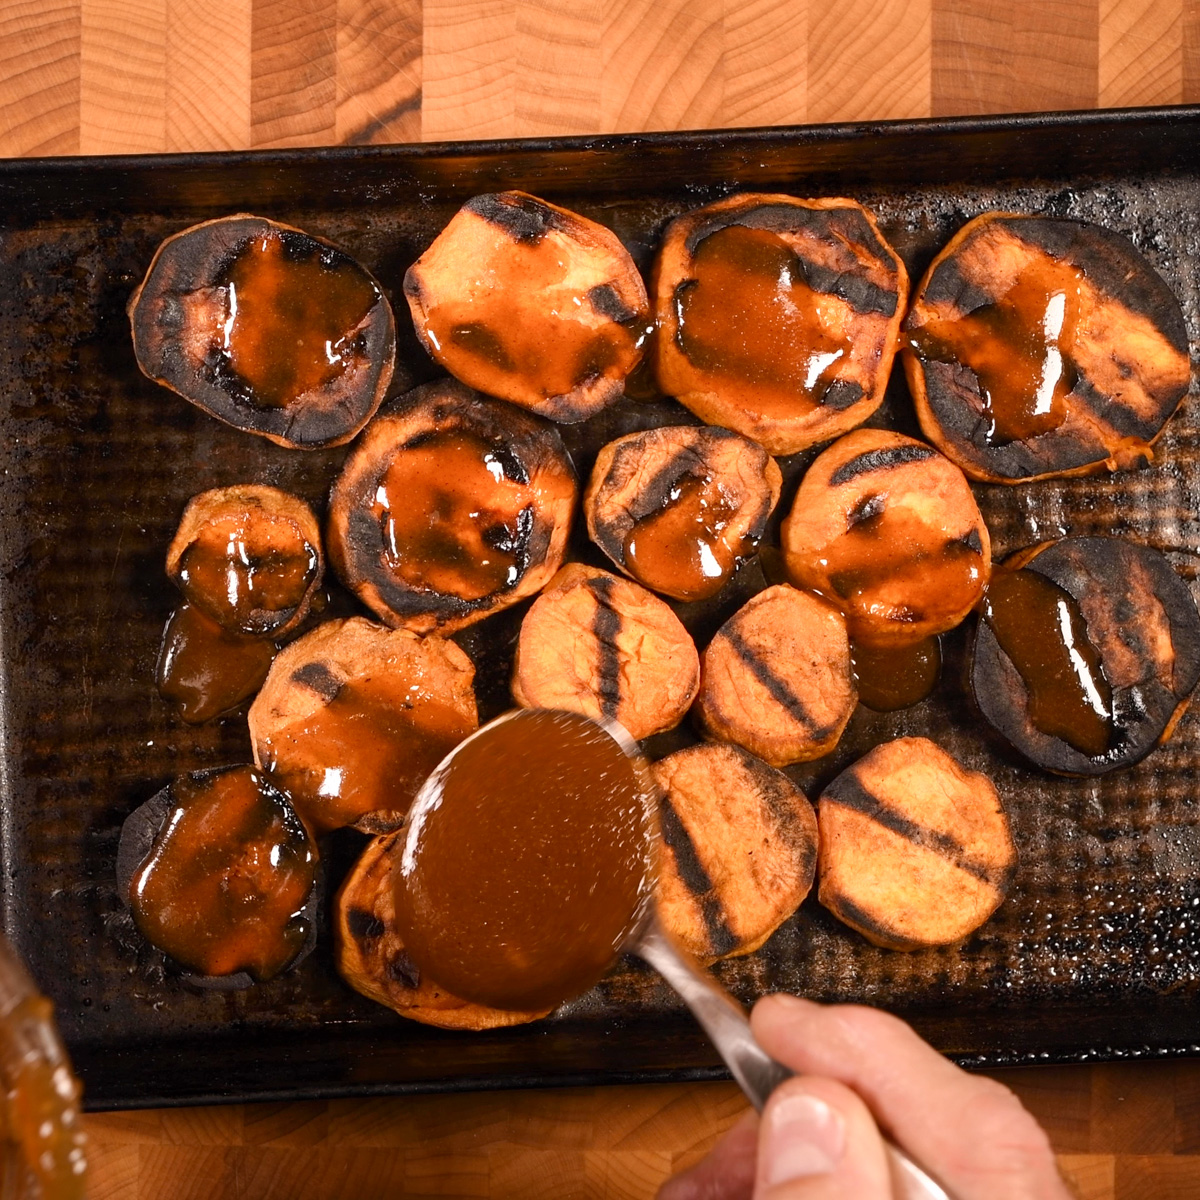 Spoon the glaze over the grilled sweet potatoes.